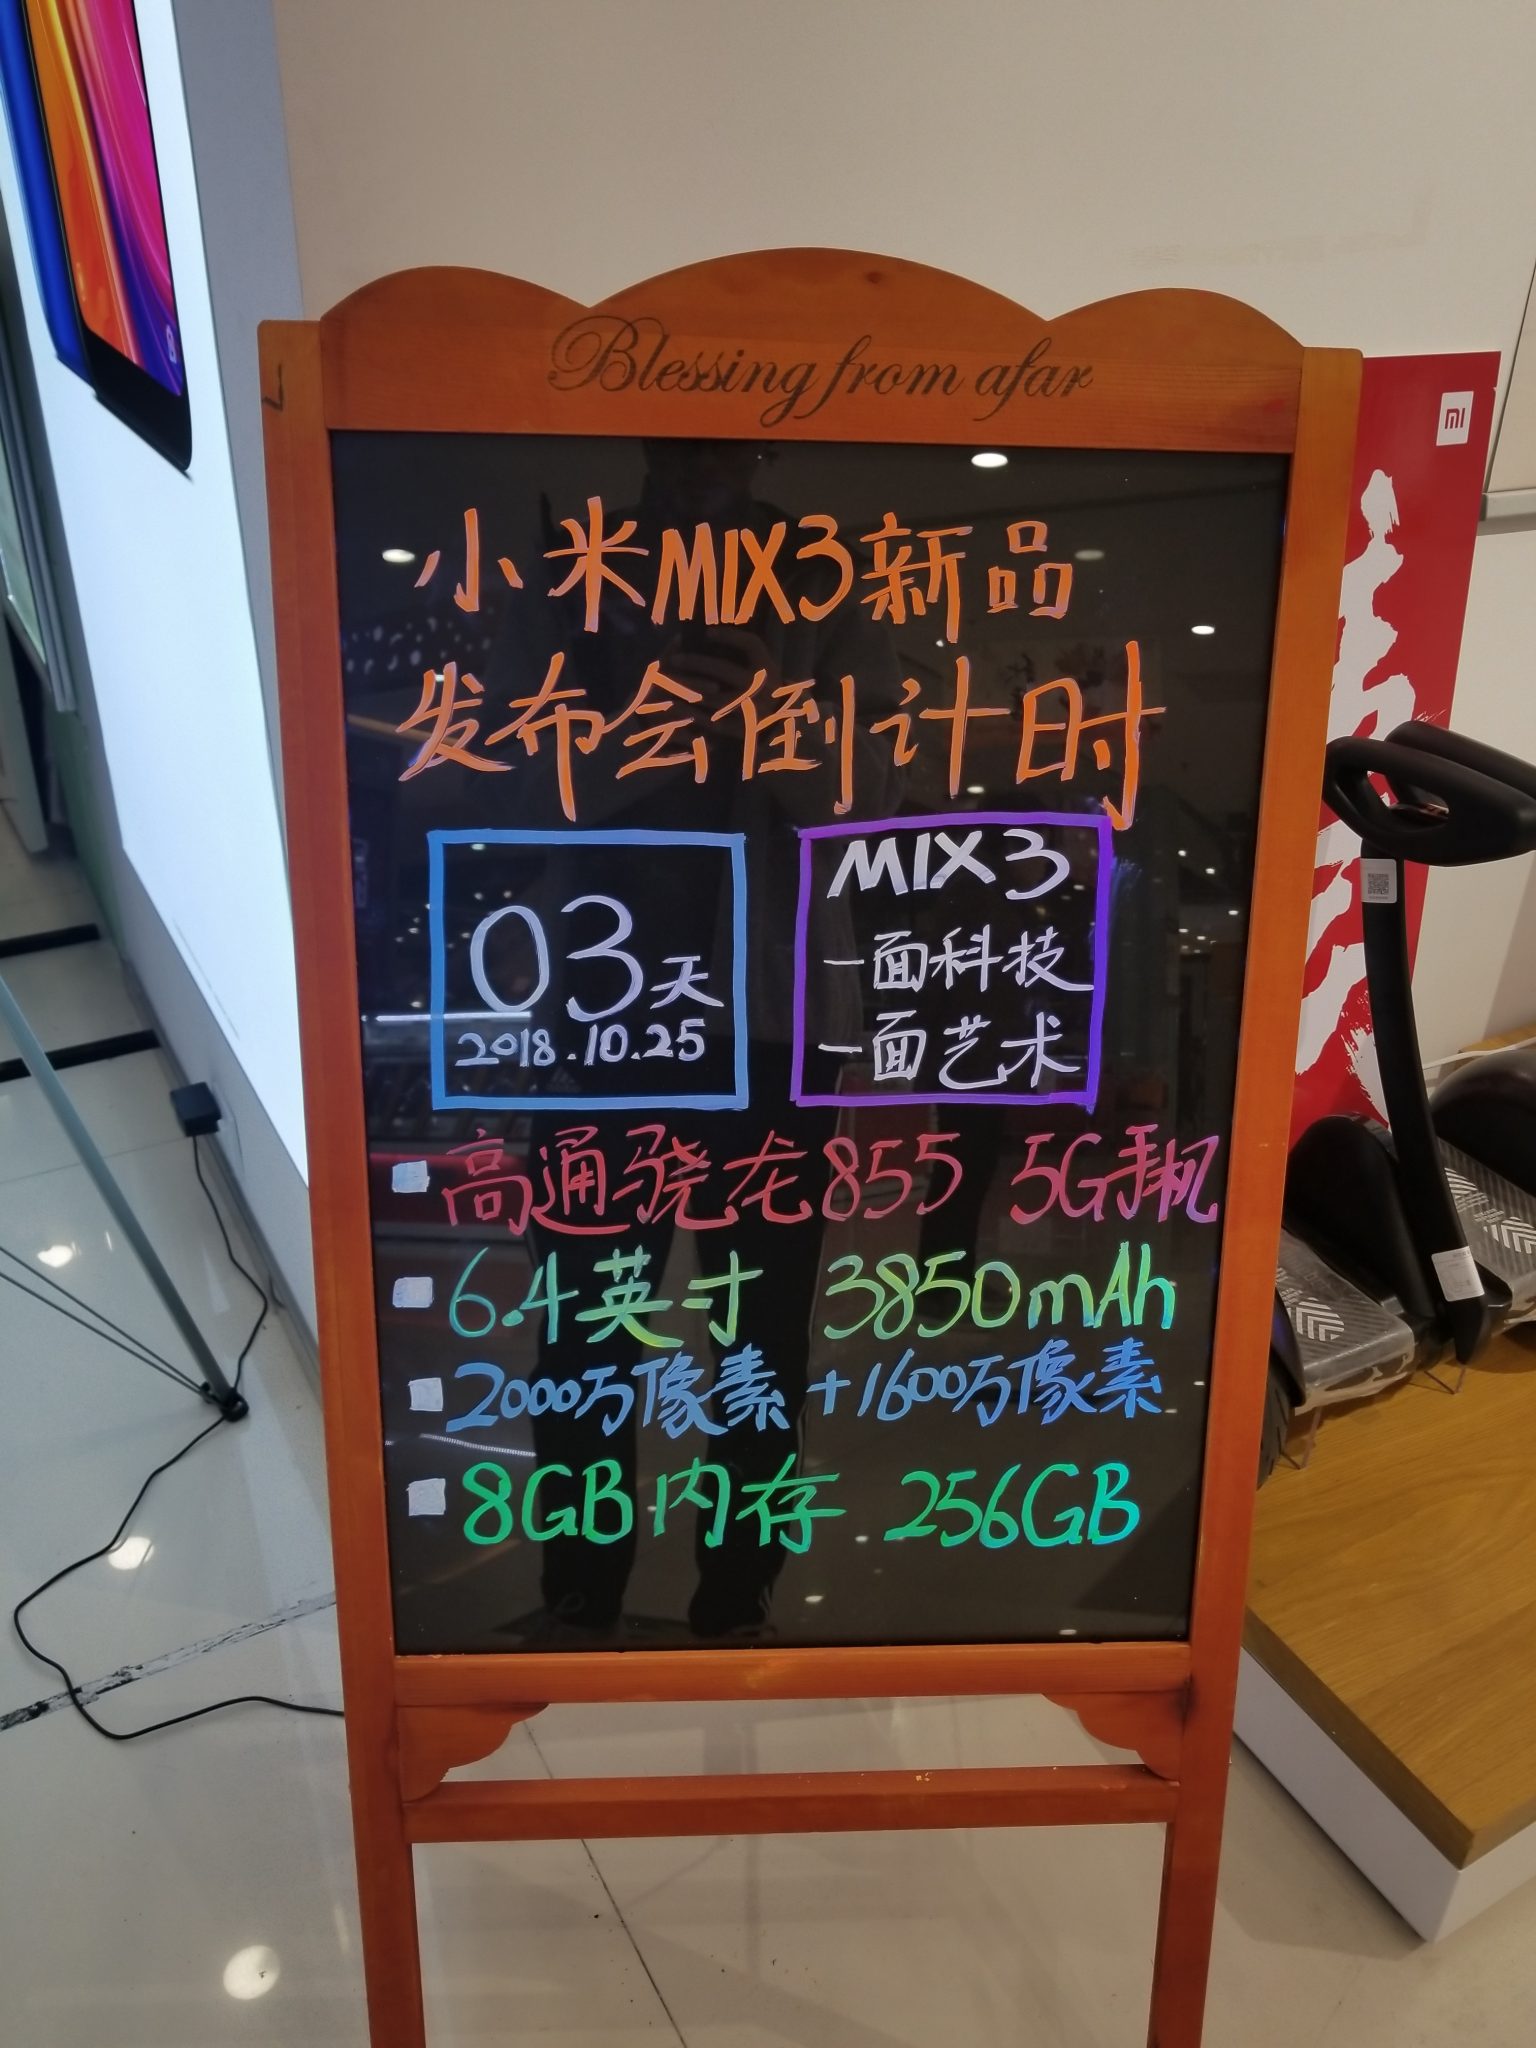 Xiaomi Mi Mix 3 specs leaked, comes with SD 855 and 5G support